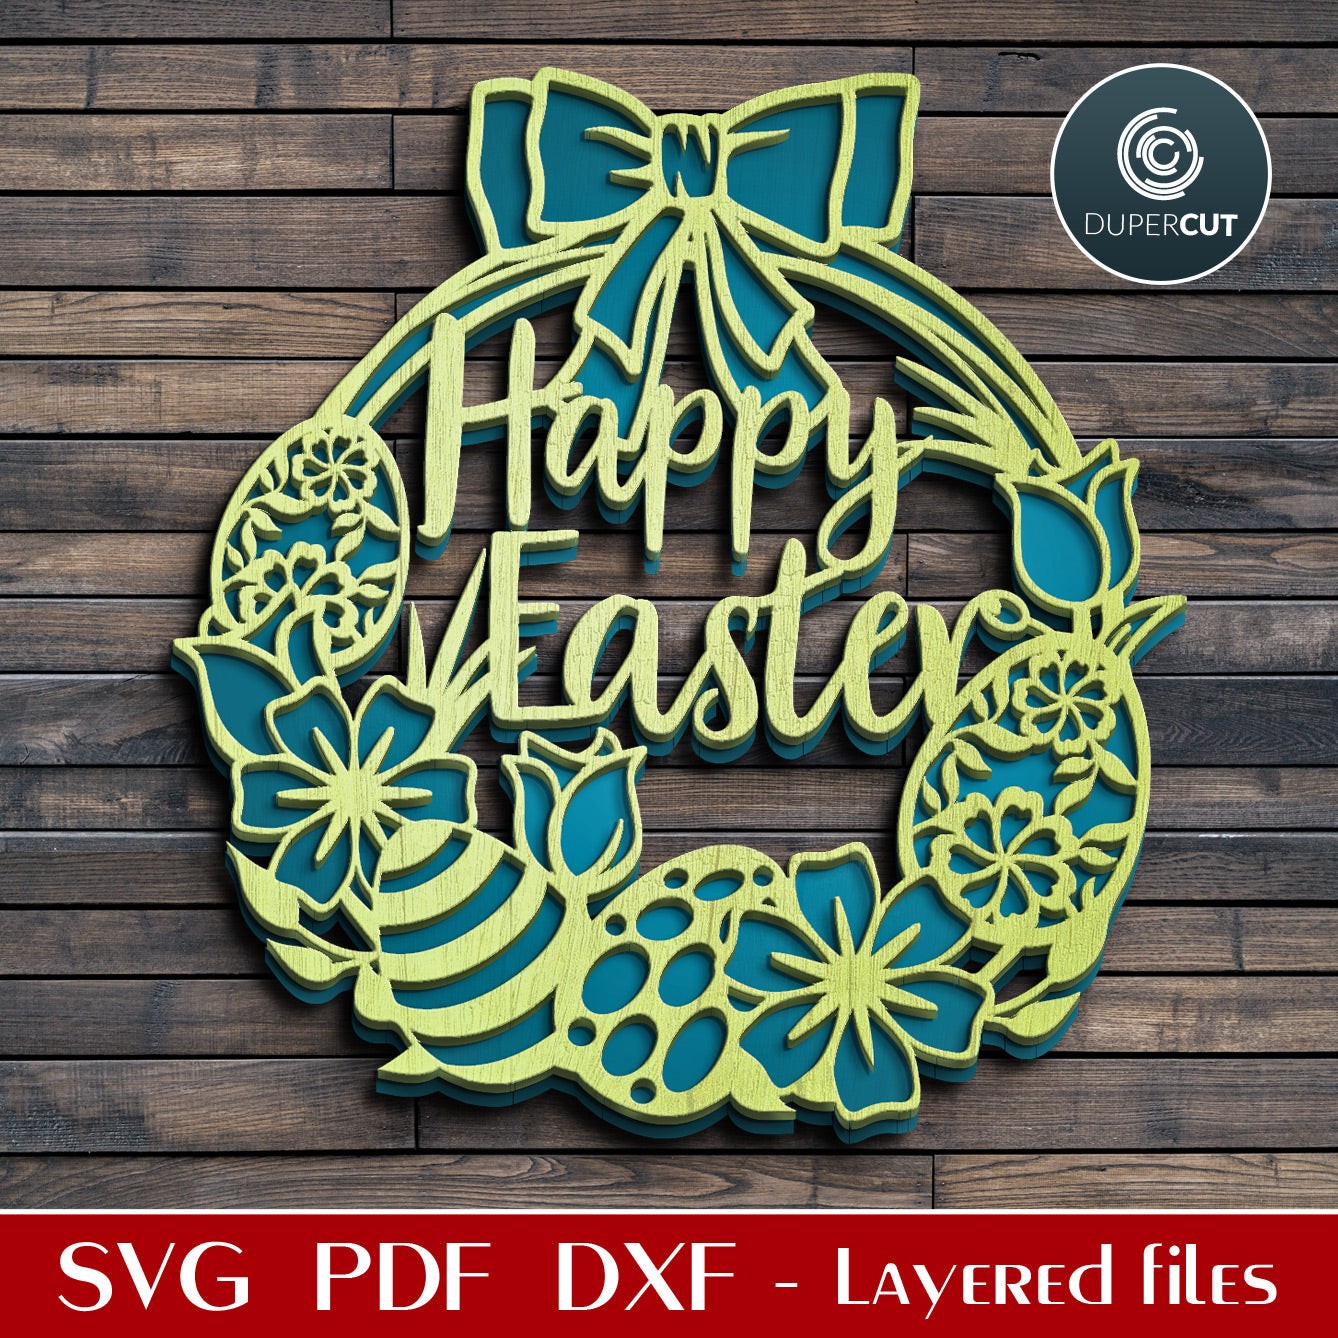 Happy Easter door sign decoration - SVG DXF vector layered files for Glowforge, Cricut, Silhouette Cameo, CNC plasma machines, scroll saw pattern by www.dupercut.com